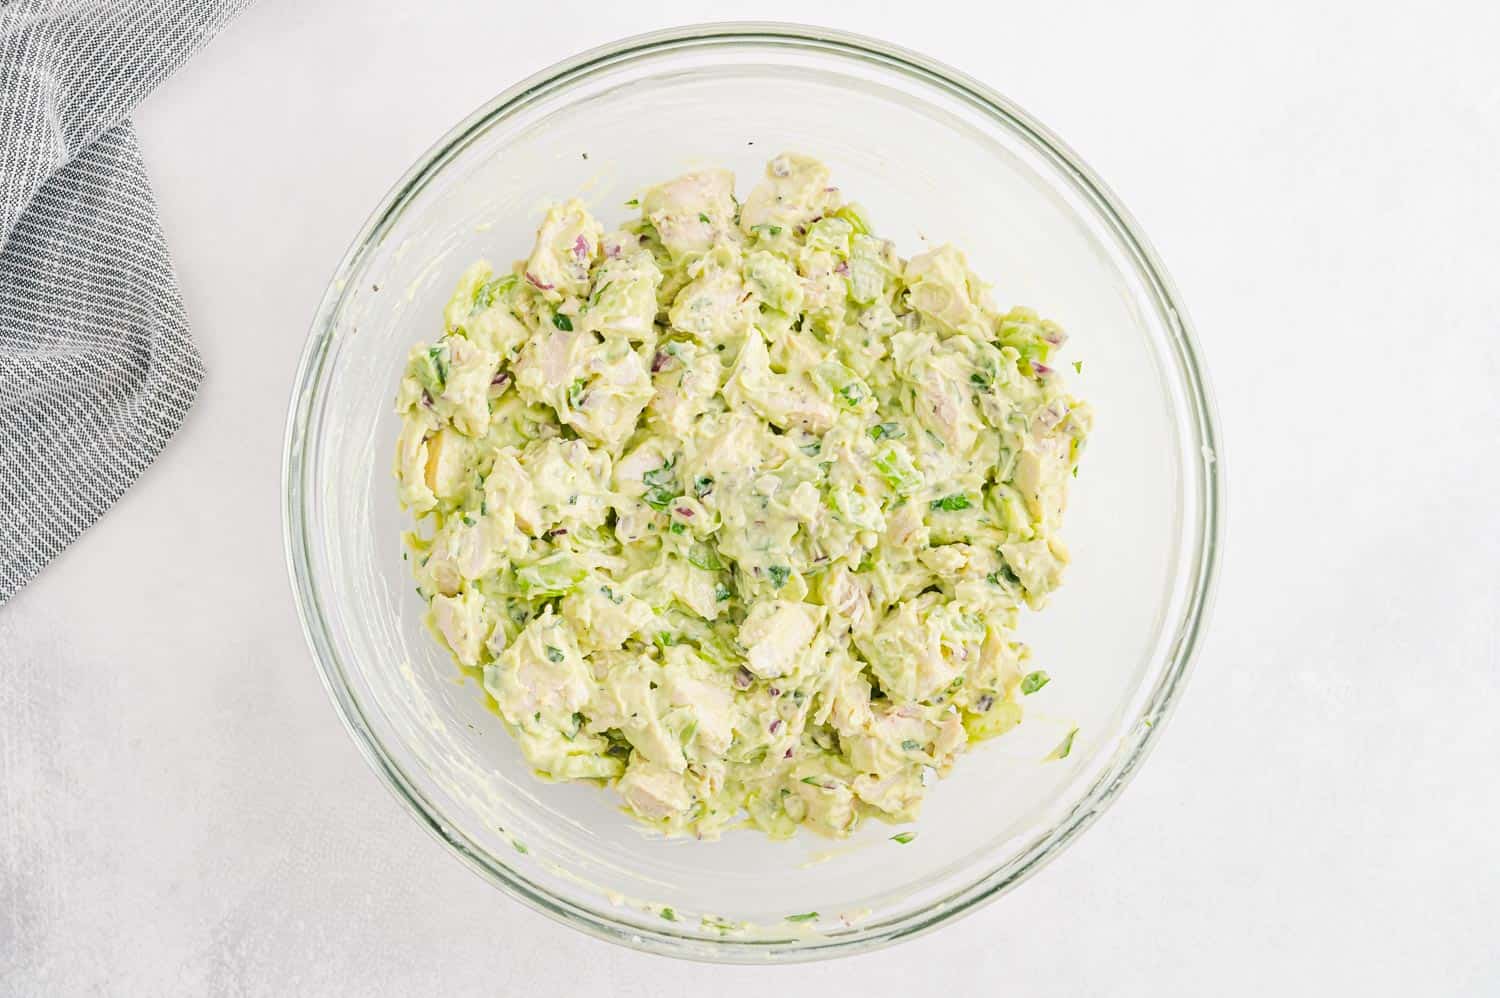 Mixed chicken salad in a glass mixing bowl.